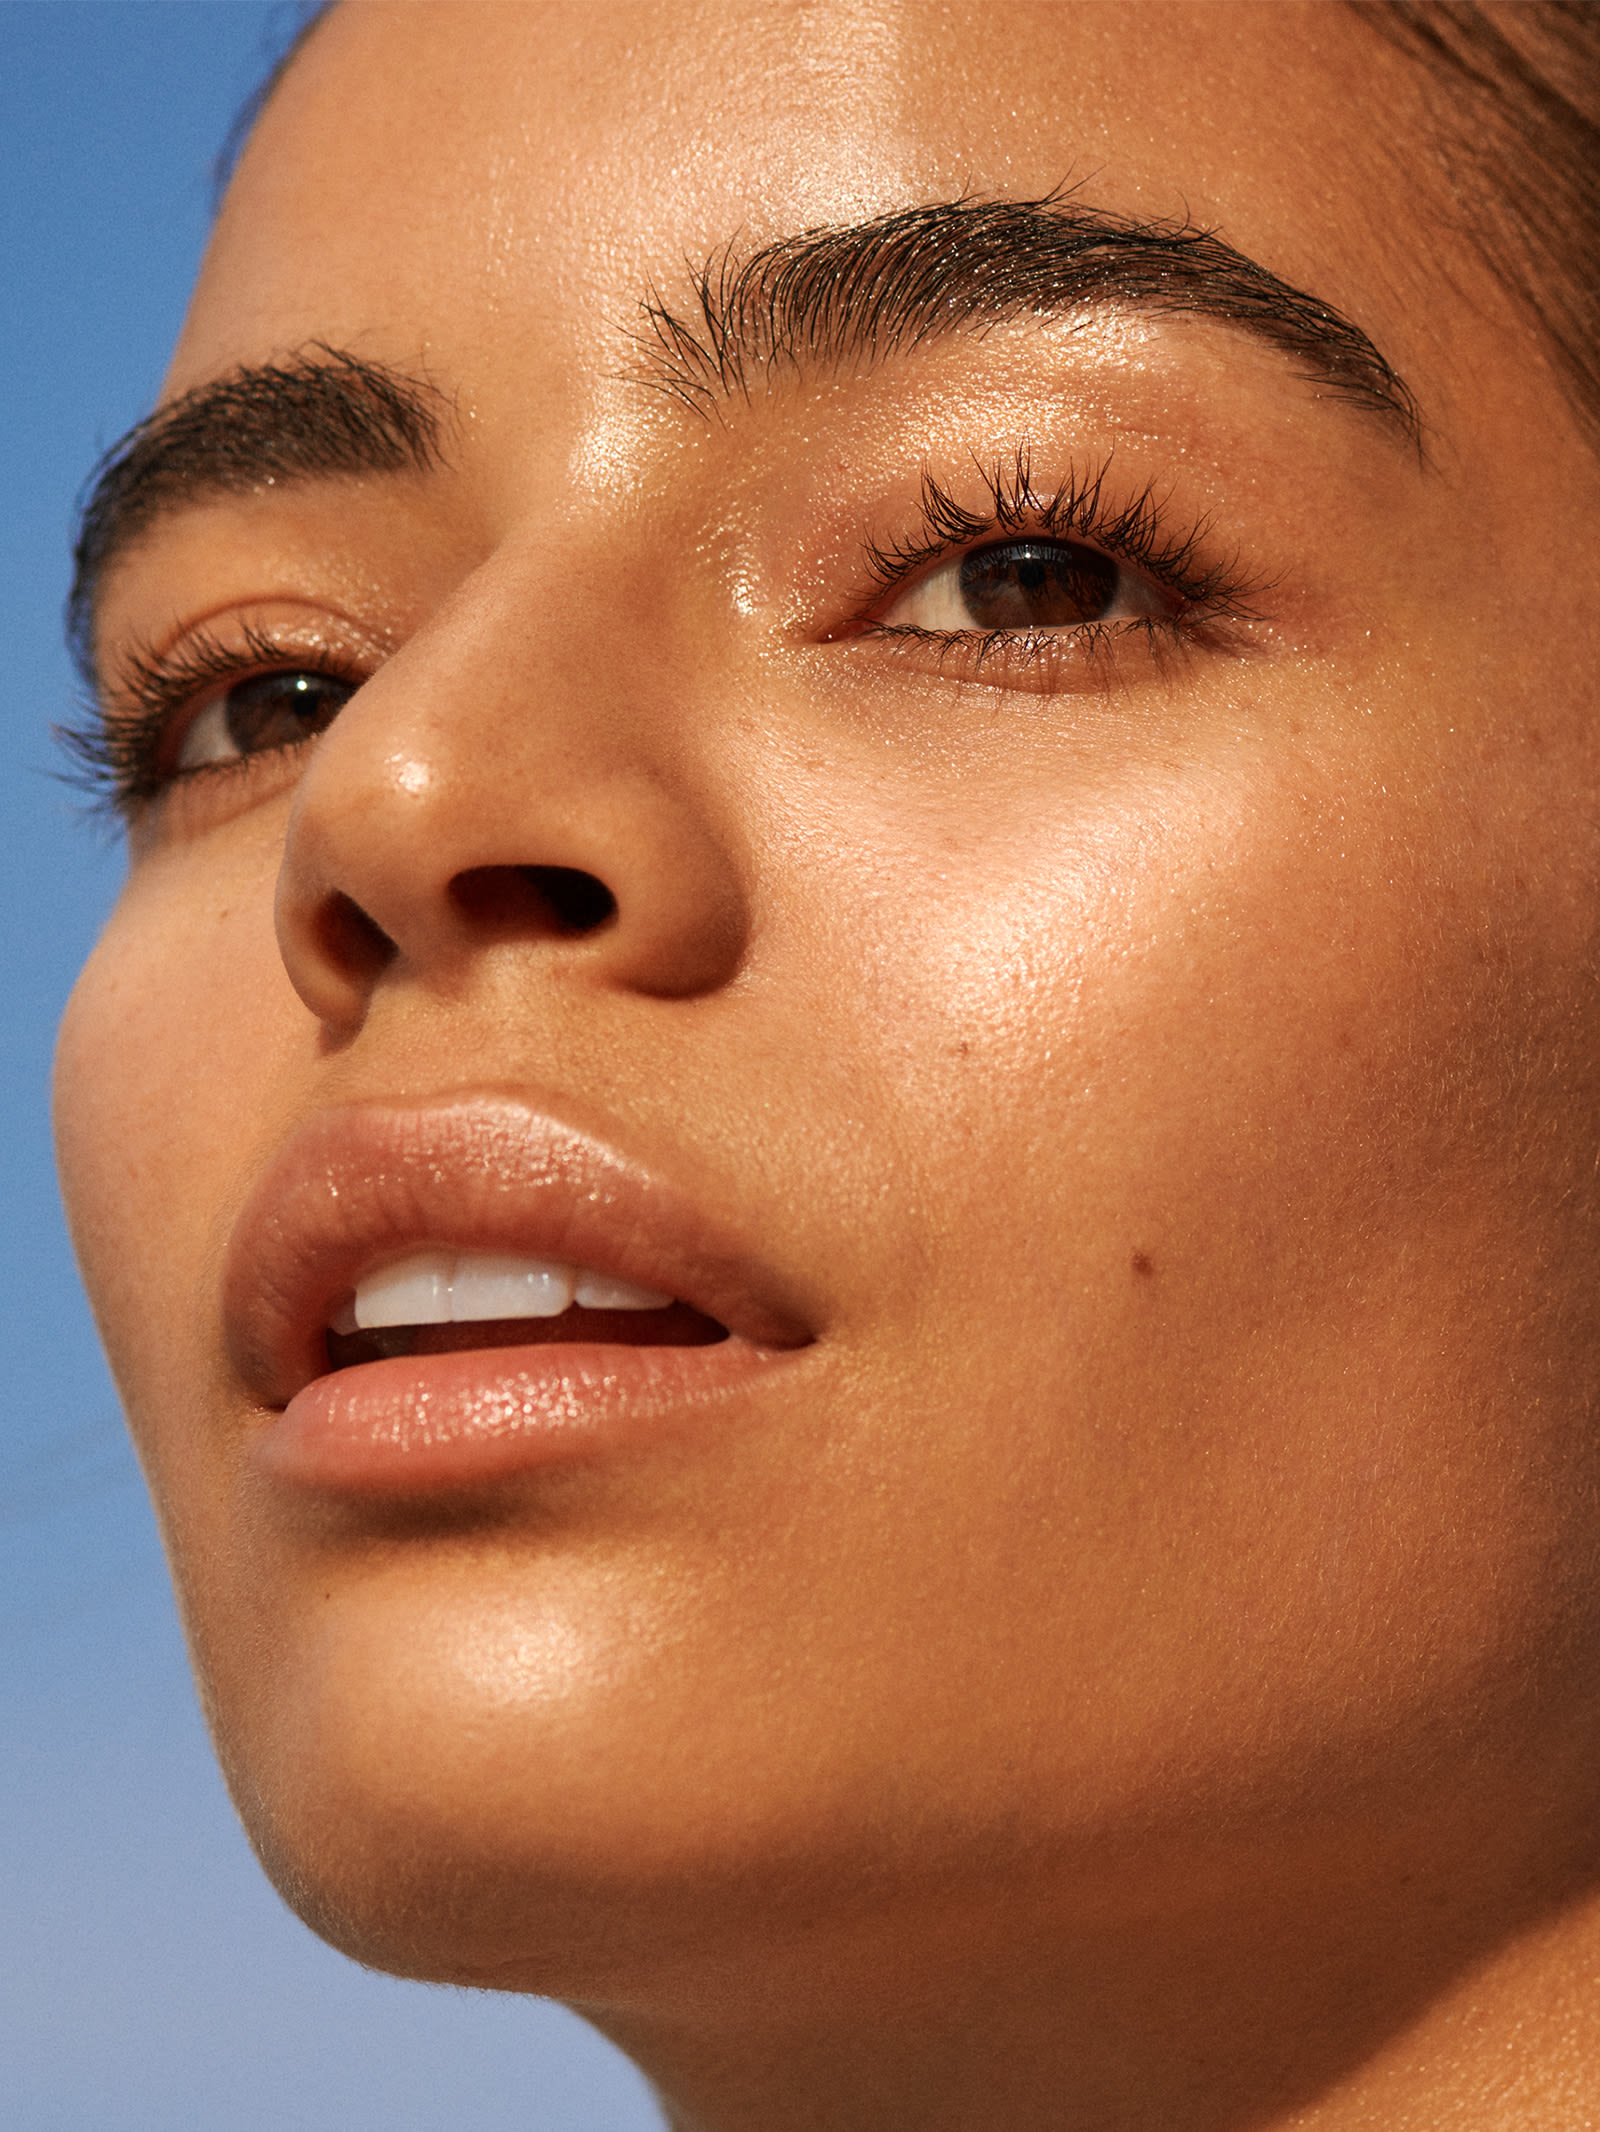 What Exactly Is Glossier Skin?